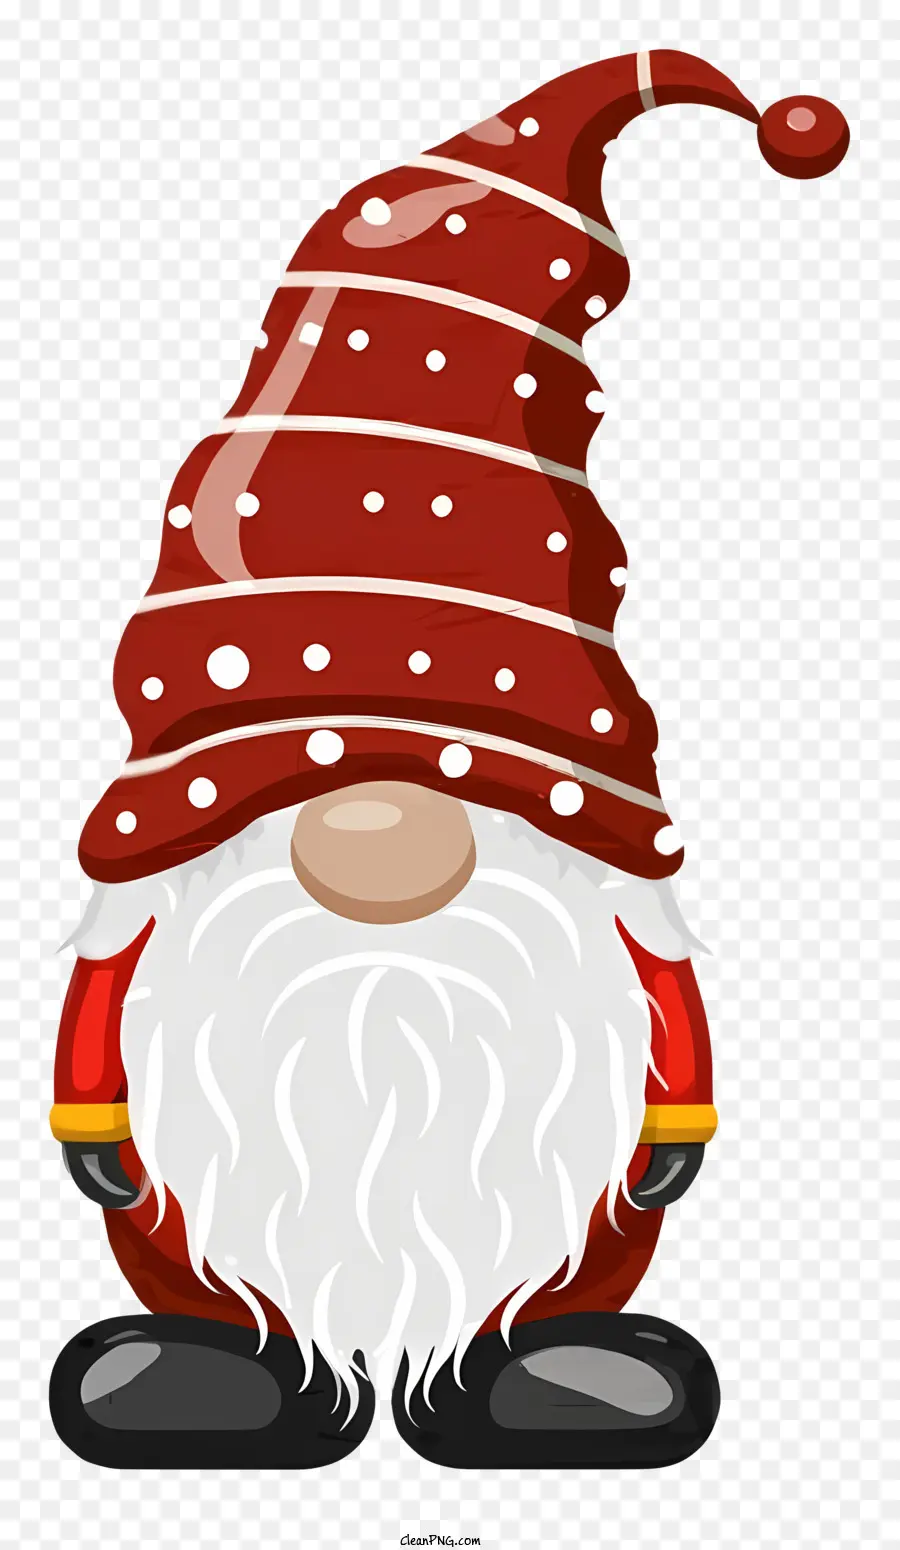 red and white gnome red and white hat white polka dots red and white beard black nose